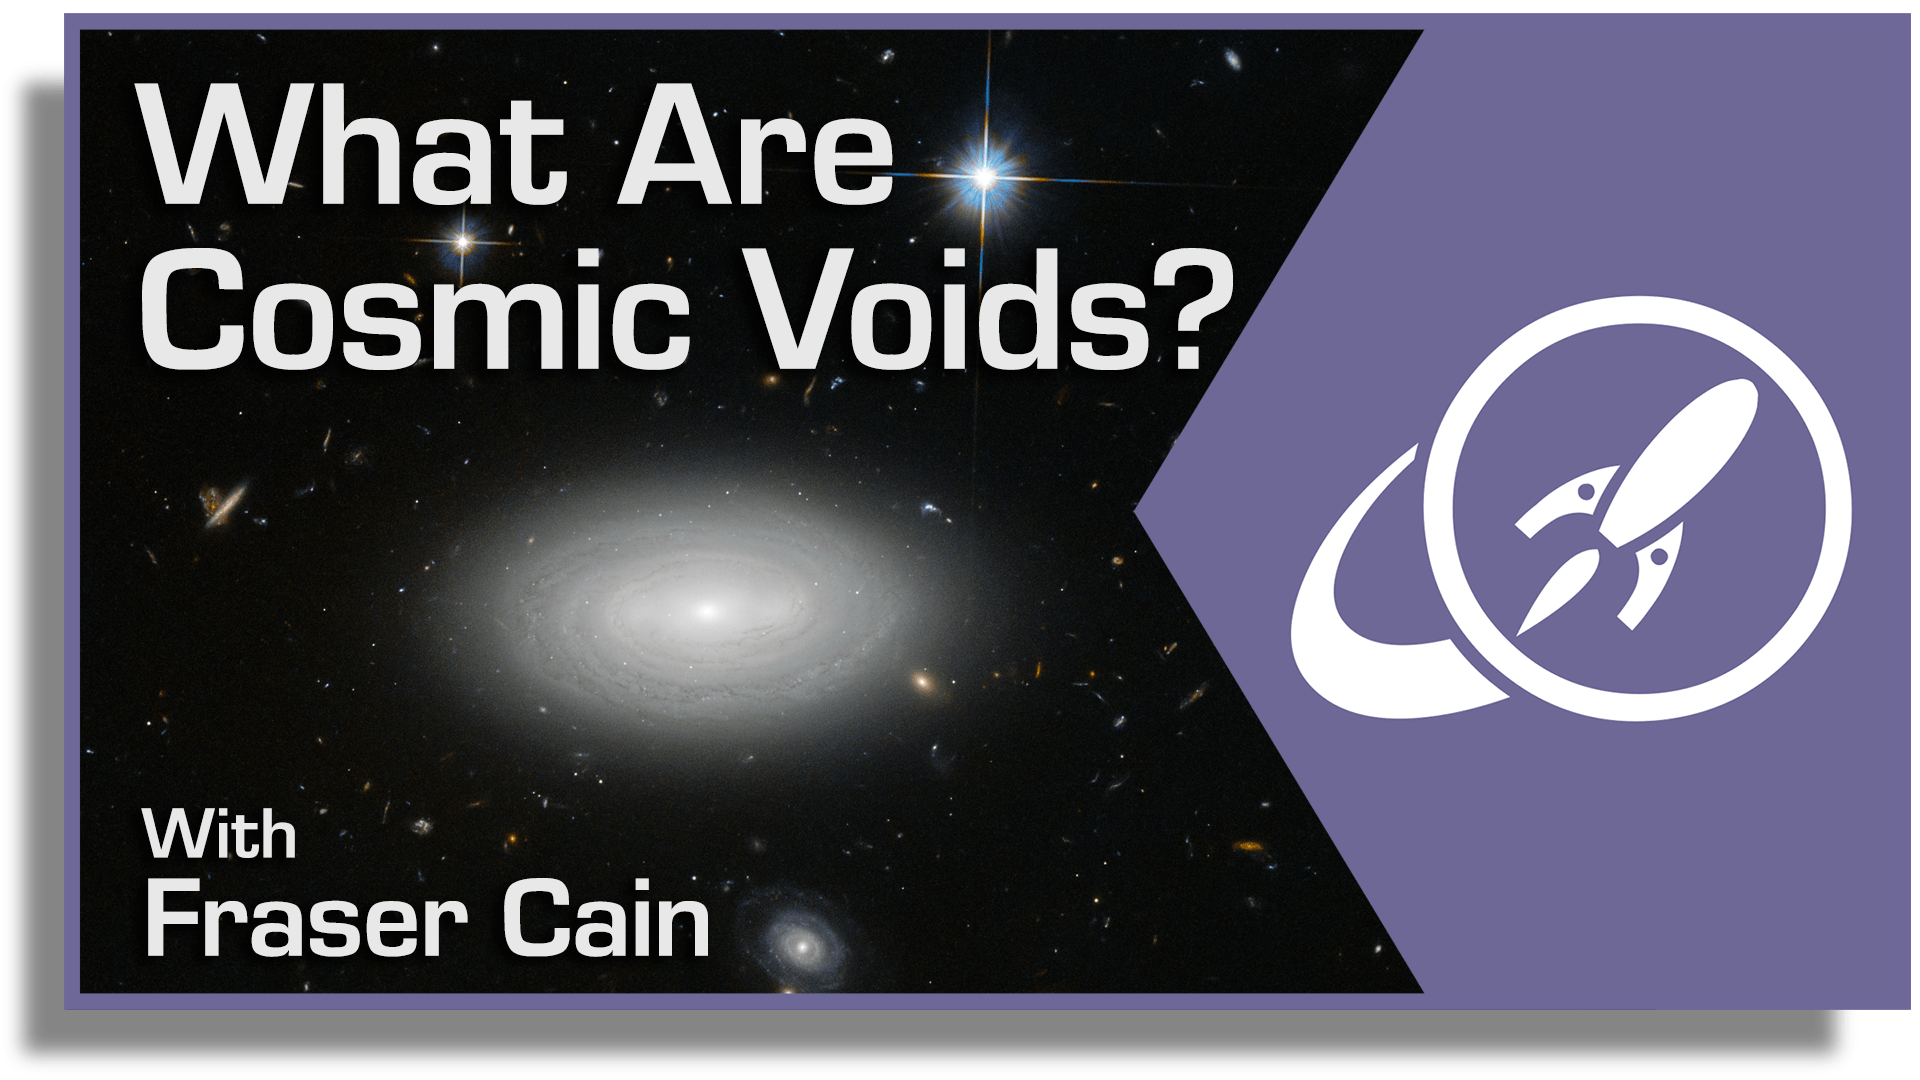 What Are Cosmic Voids?